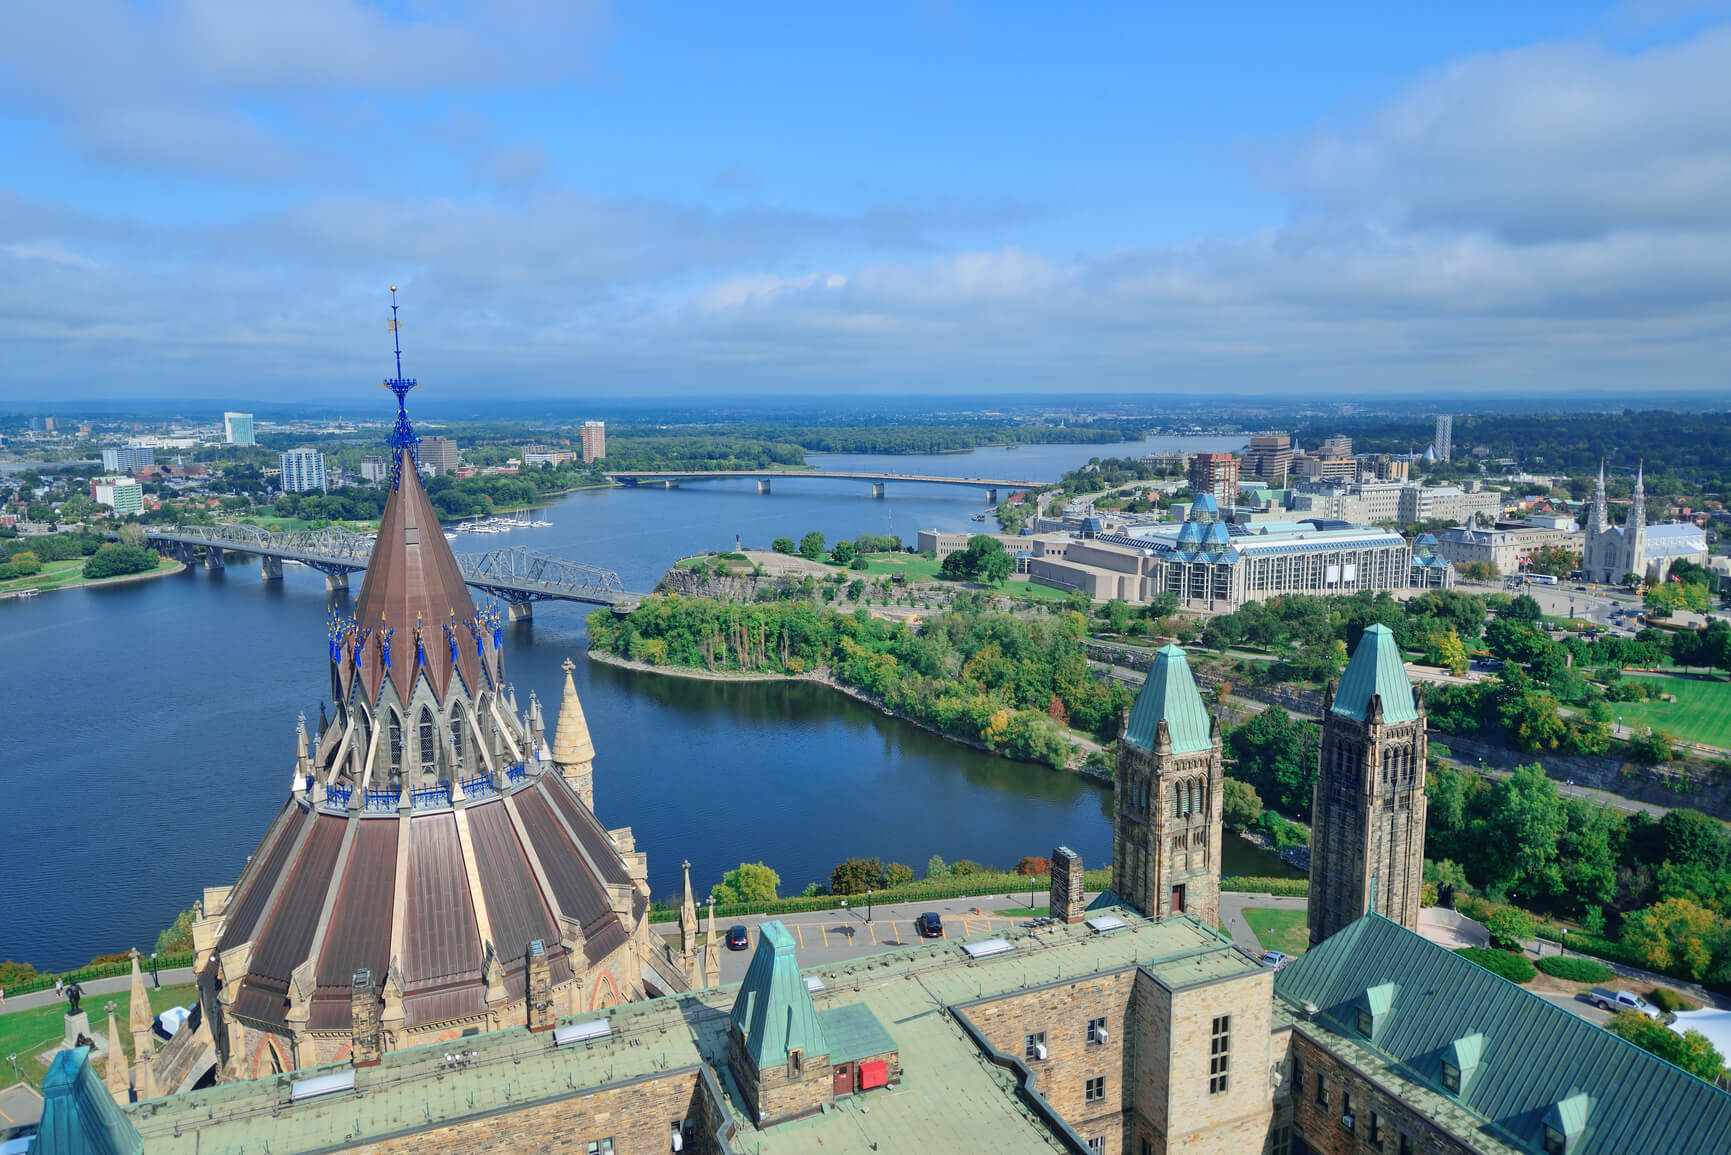 Flight deals from Tunis, Tunisia to Ottawa, Montreal or Quebec City, Canada | Secret Flying